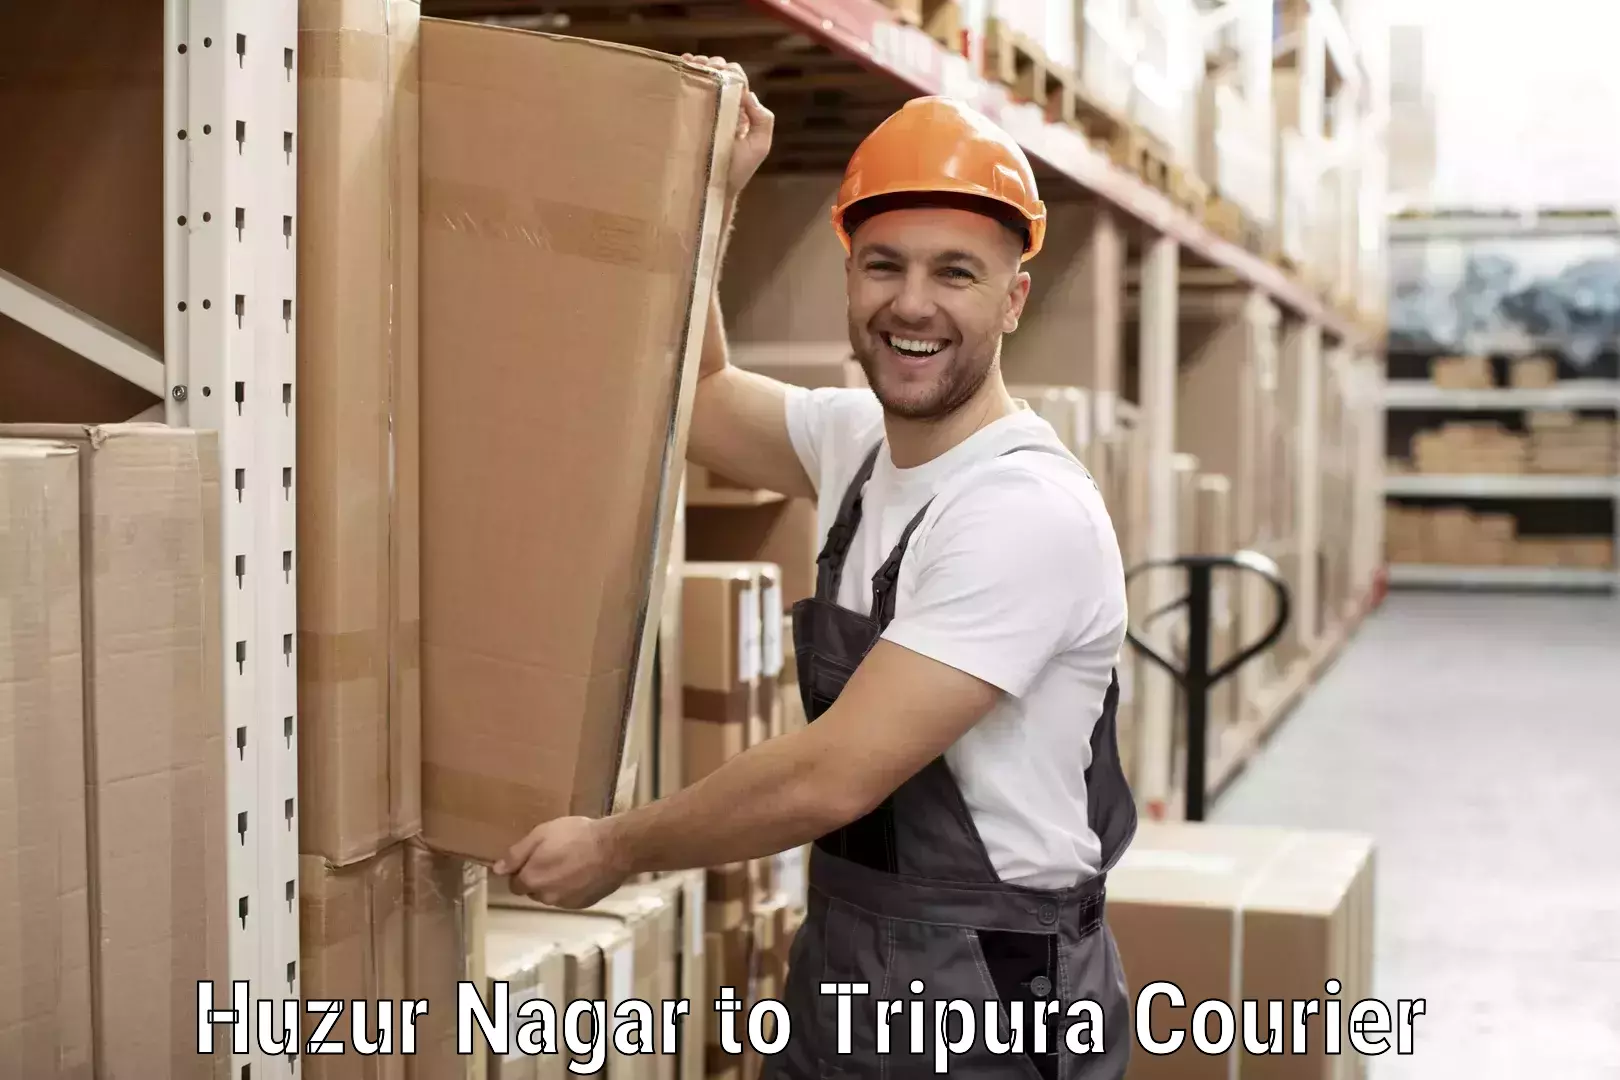 Reliable delivery network Huzur Nagar to Tripura